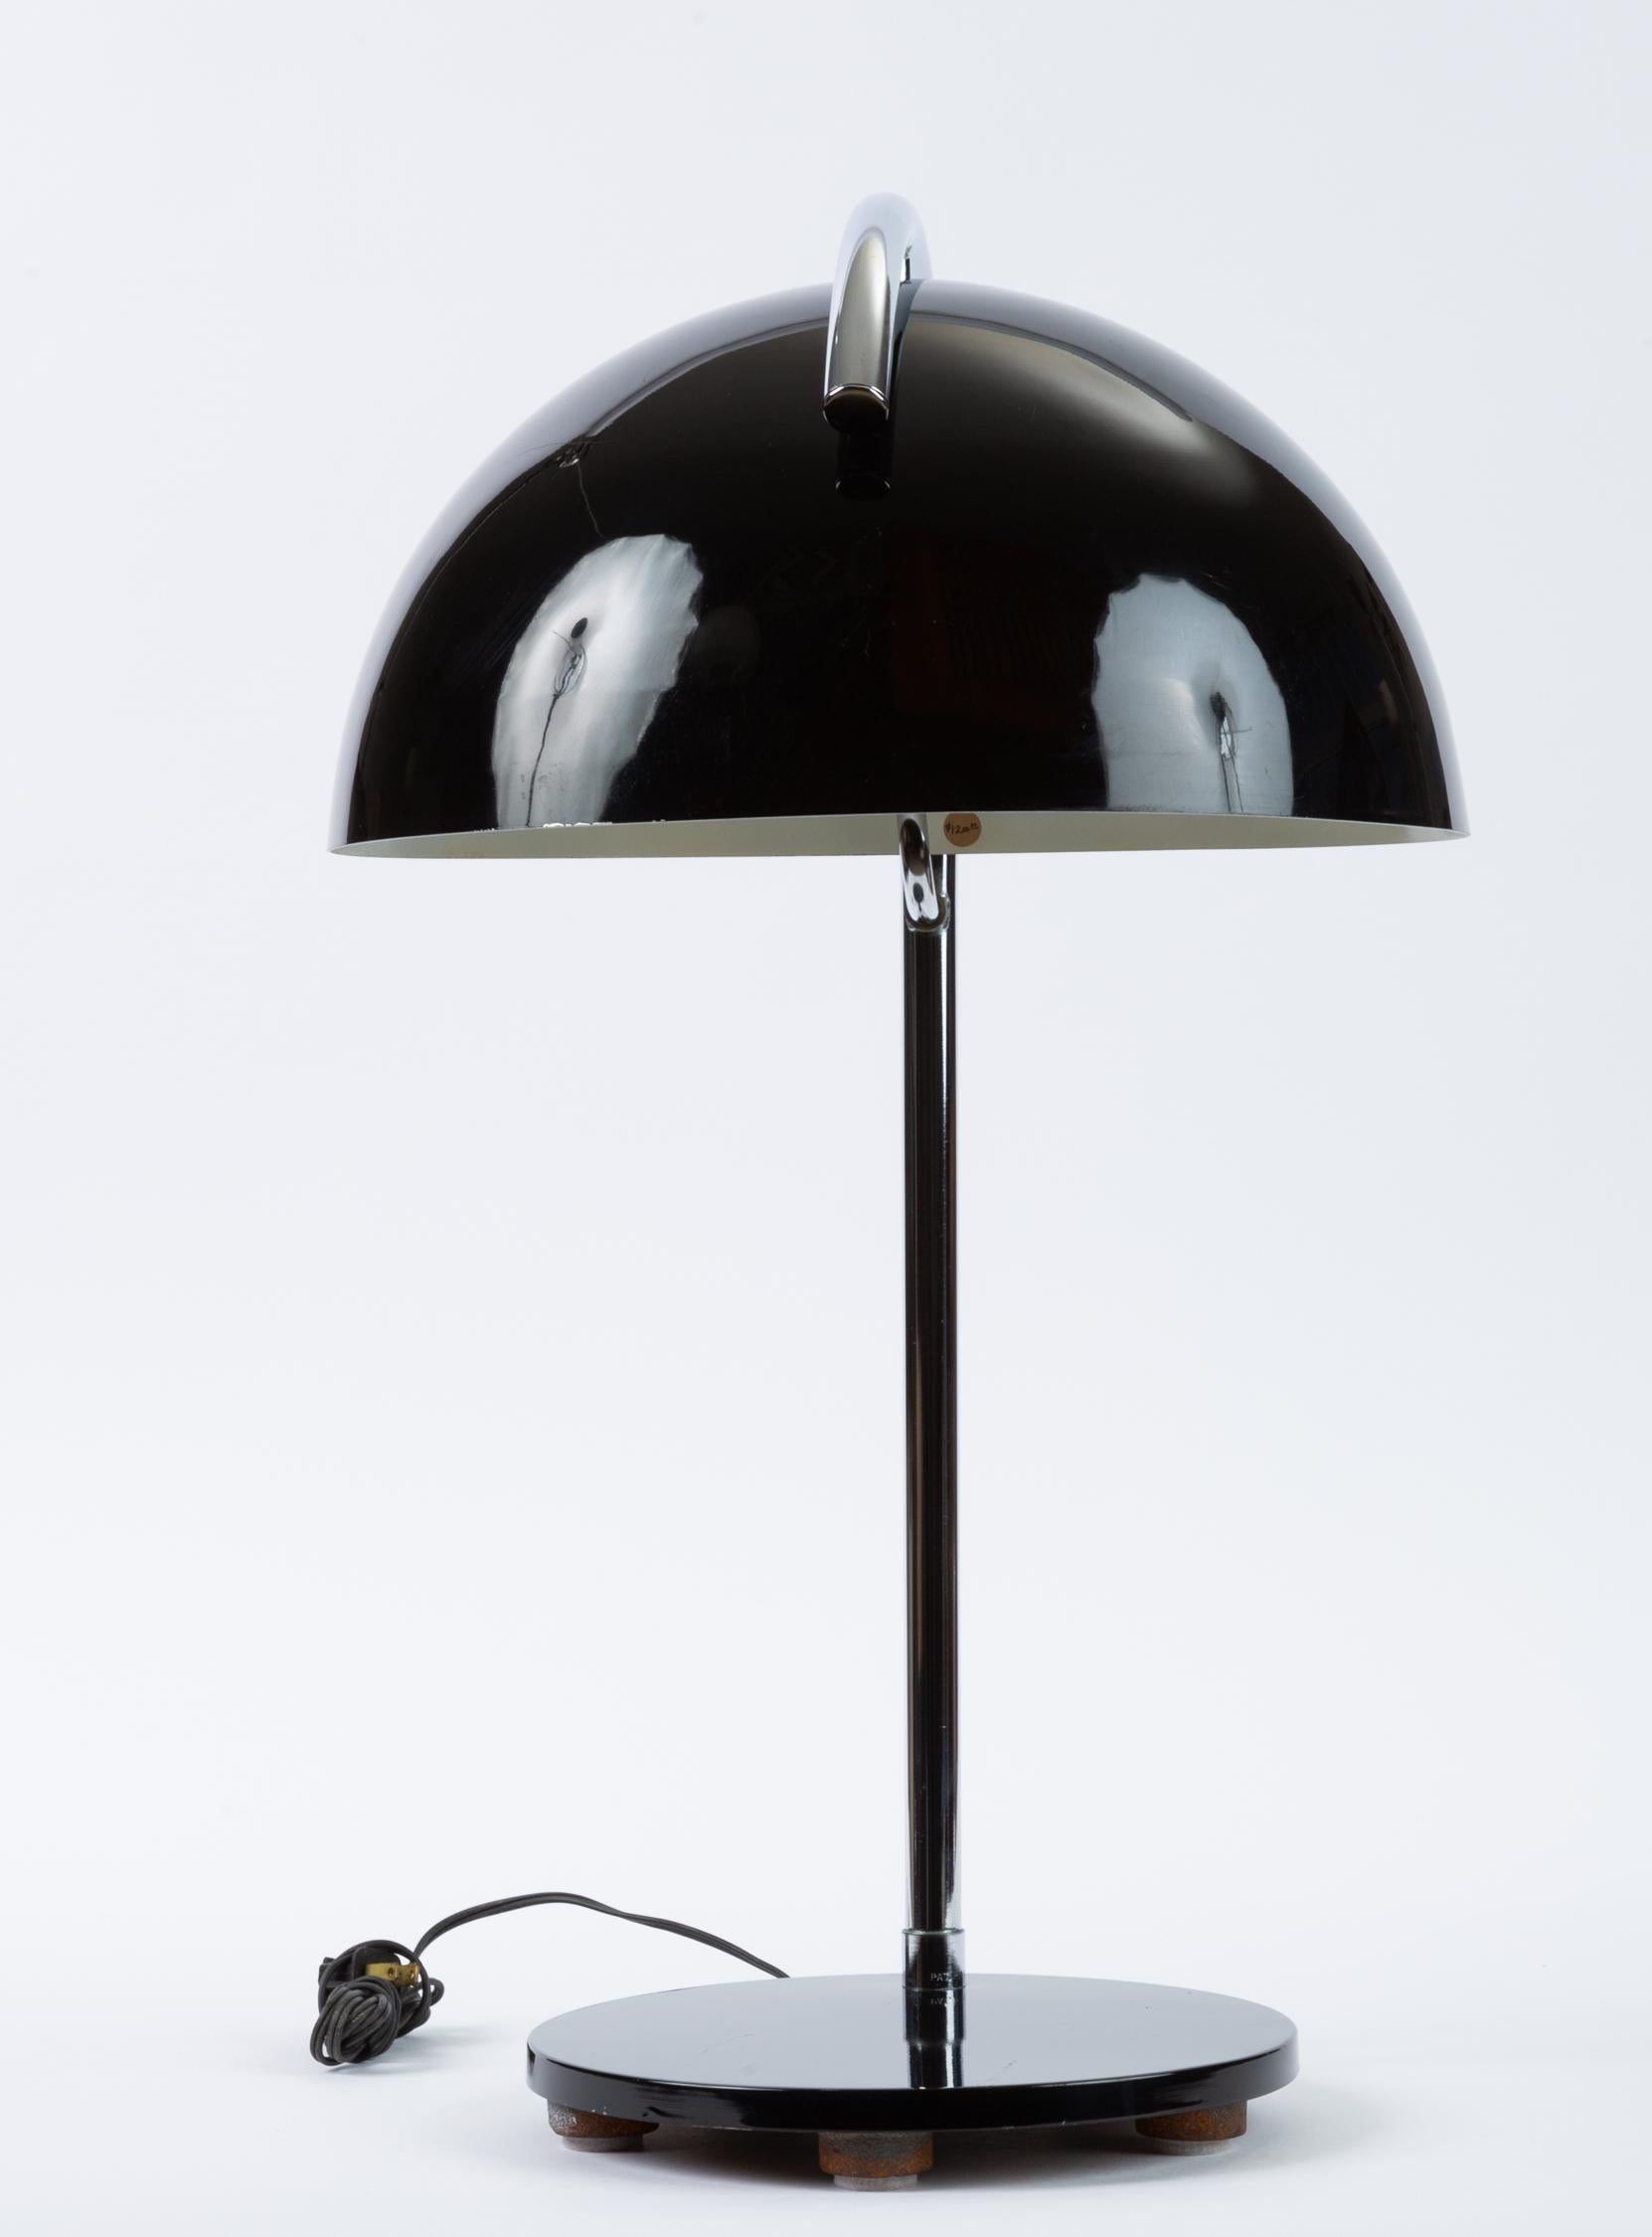 Enameled American-Made Table Lamp with Mushroom Shade